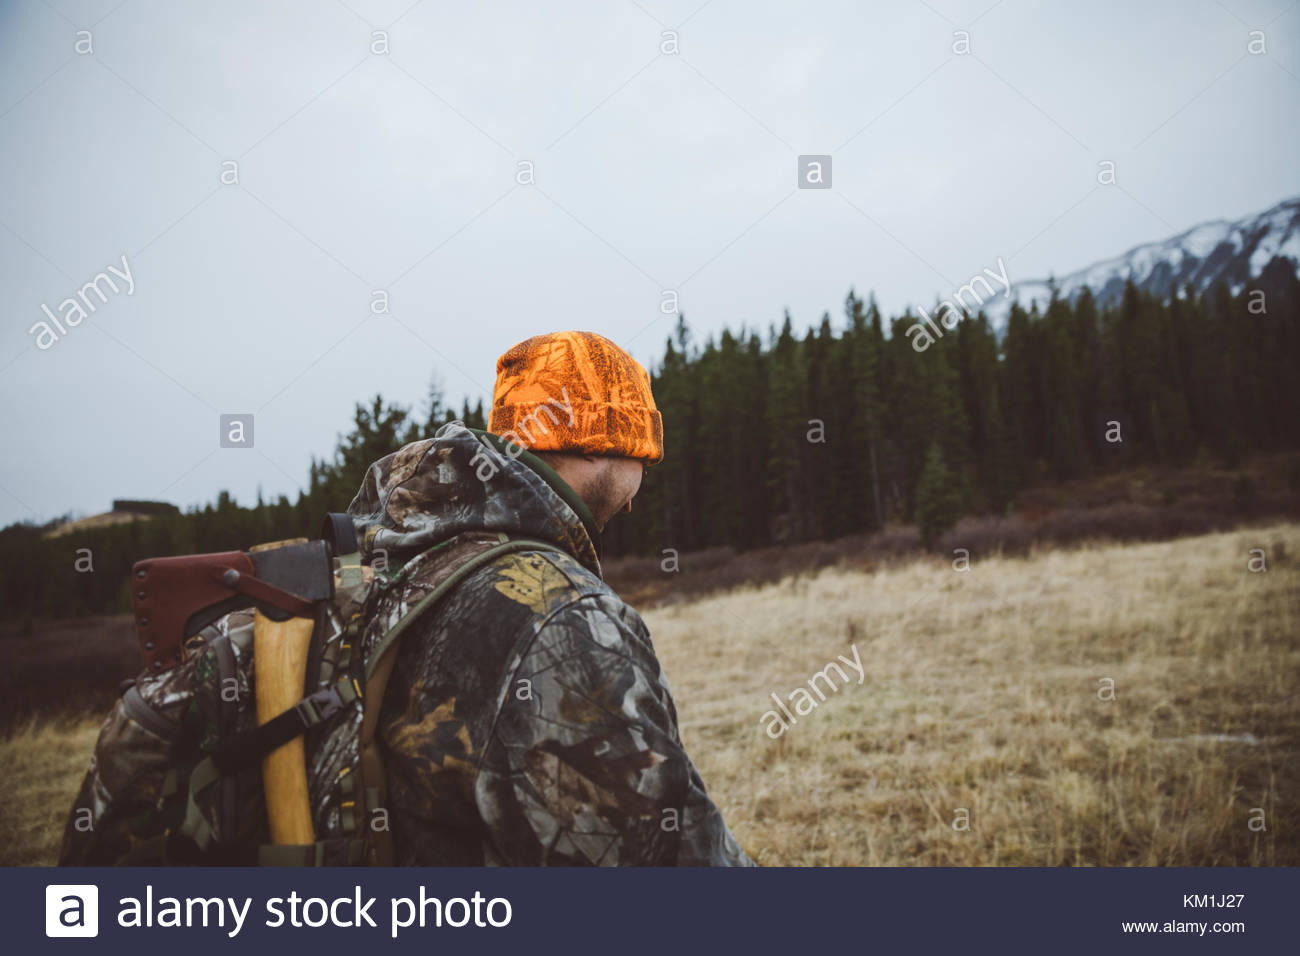 Male hunter in camouflage and orange beanie with hunting backpack and ax in remote field Stock Photo